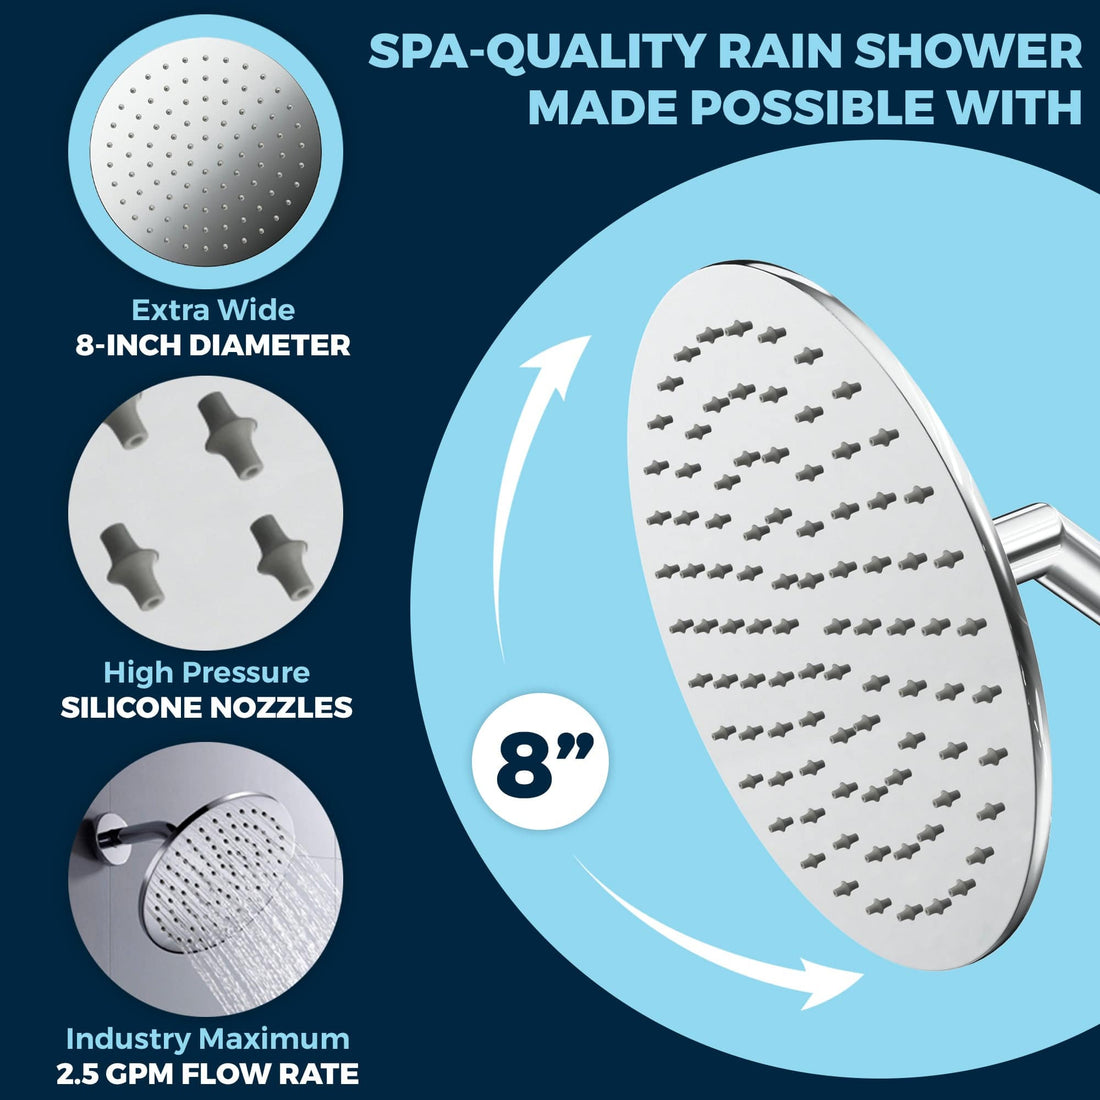 Optimized Pressure Brushed Nickel ALL METAL 8 Inch Rainfall Shower Head - Shower Head Rainfall - 2.5 GPM High Flow Shower Head Optimized for Pressure – Large Round Rain Shower Heads - Wall, Overhead, or Ceiling Mount Chrome / 16 Inch - The Shower Head Store